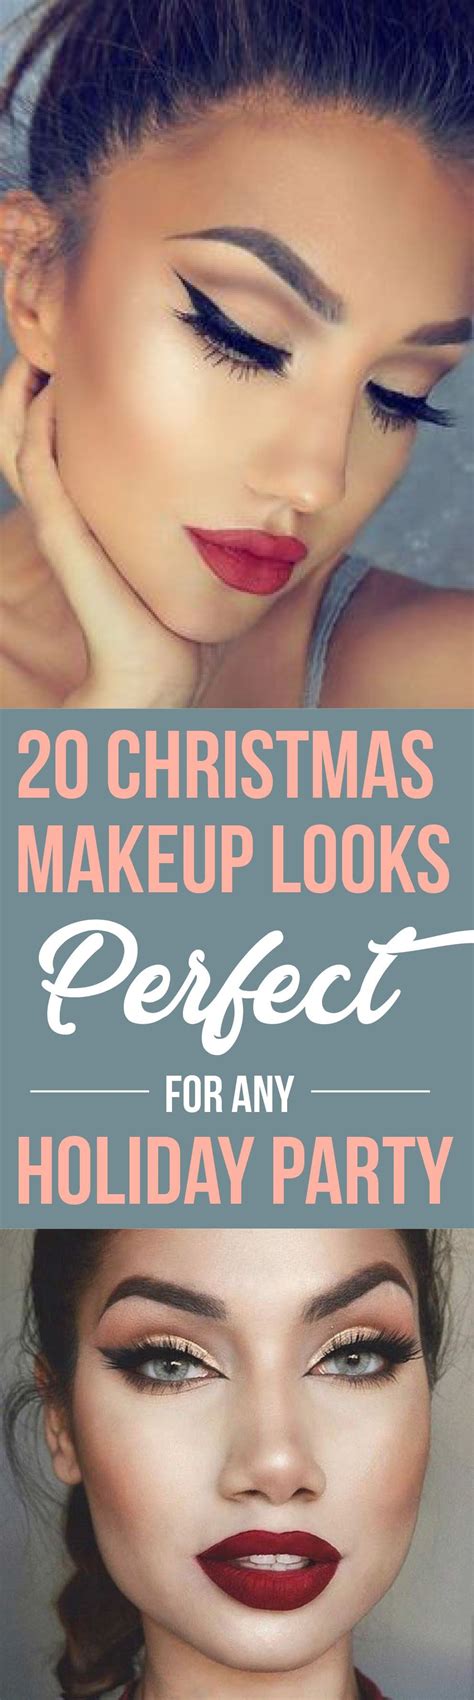 These Christmas Makeup Looks Are Perfect For Any Holiday Party Party